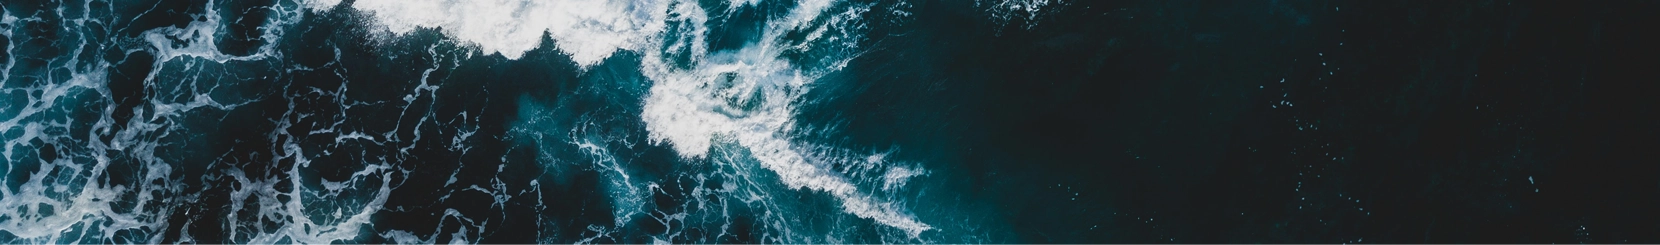 A photograph of waves crashing in the ocean.